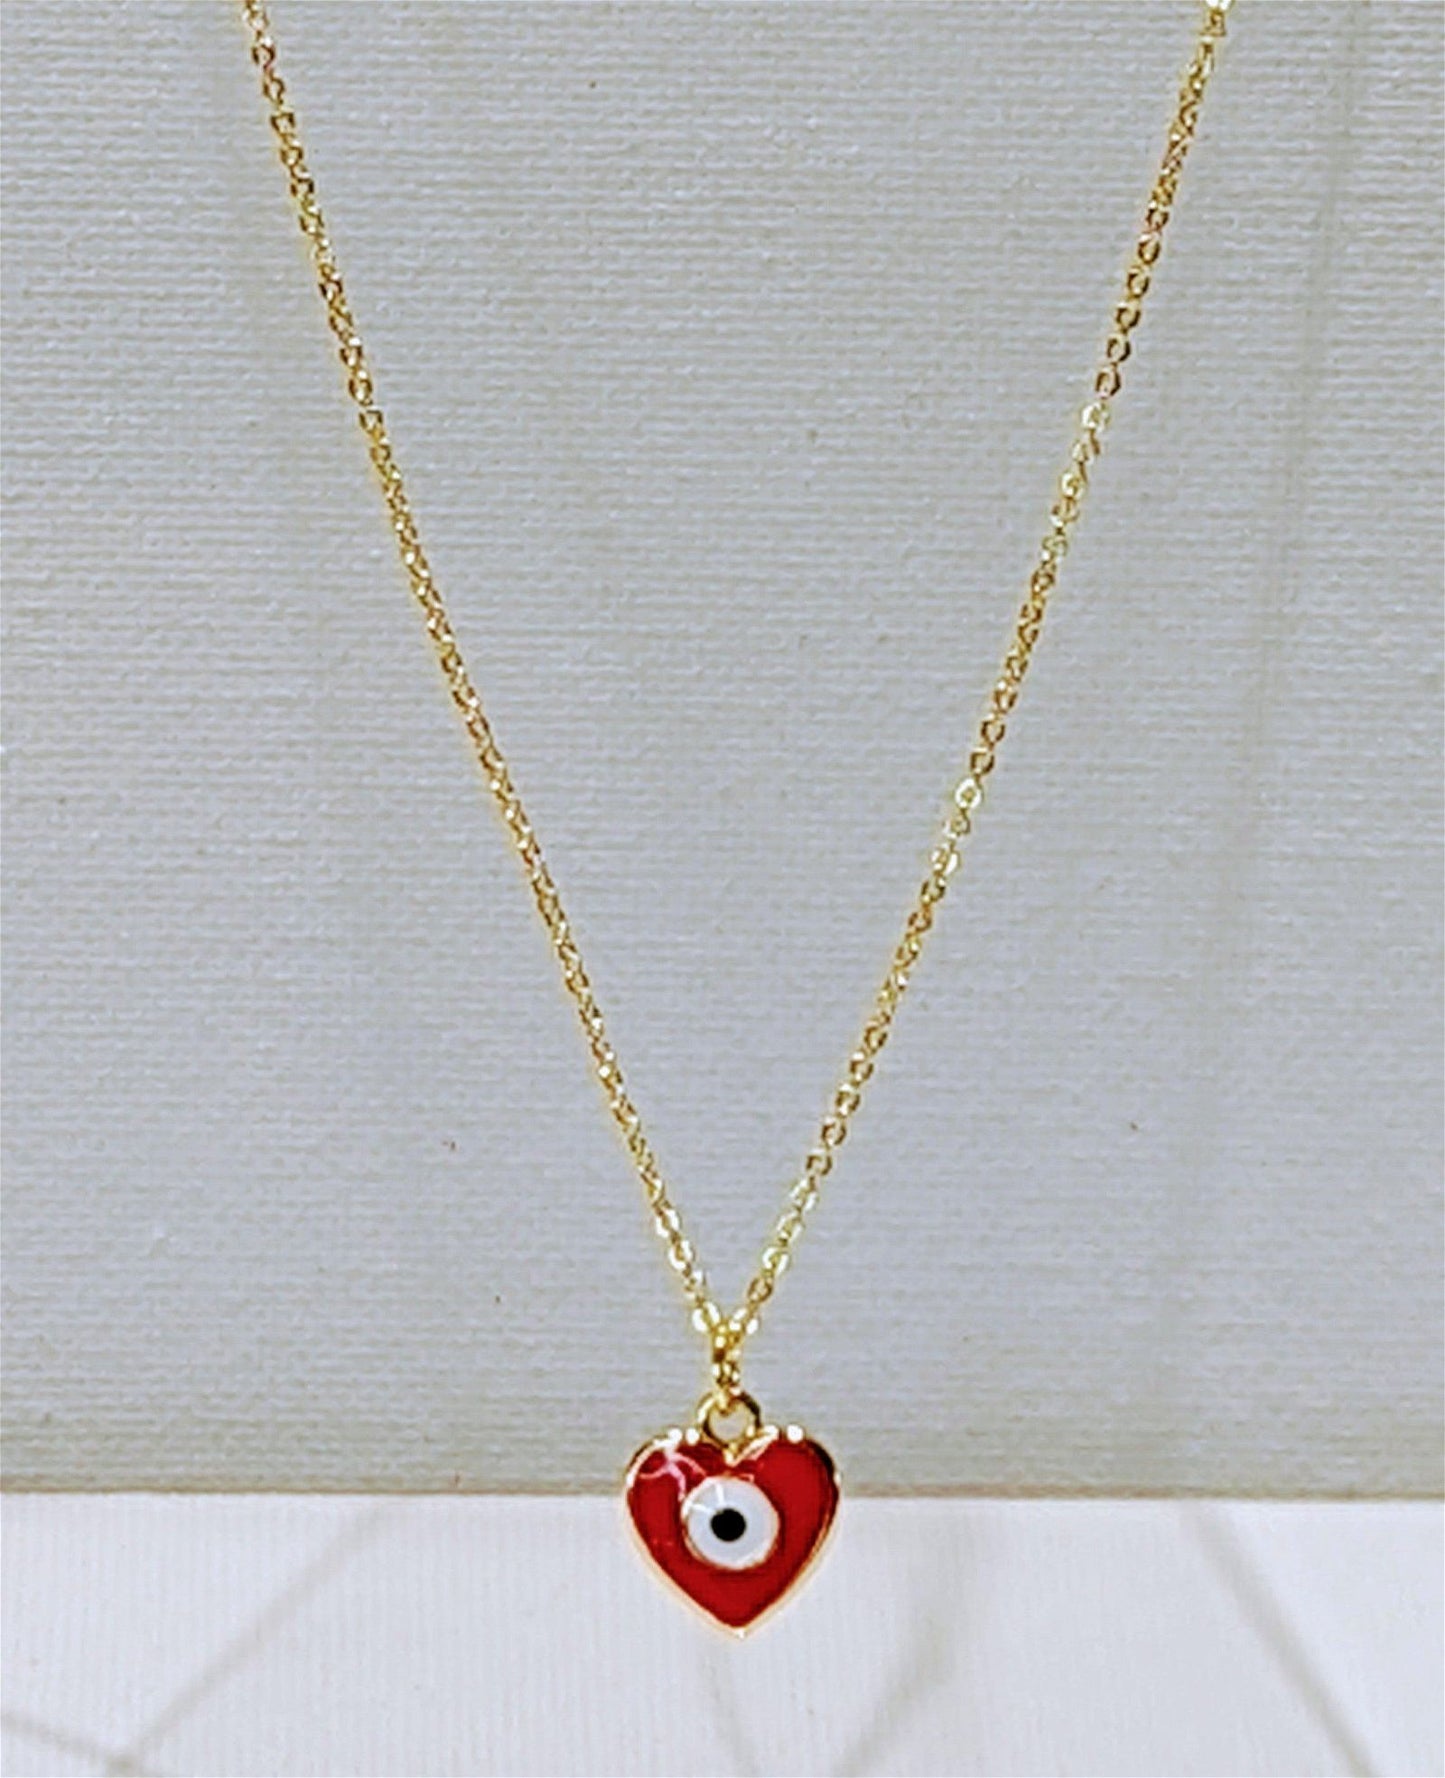 Eye on the heart necklace - Maily's Classic Accessories